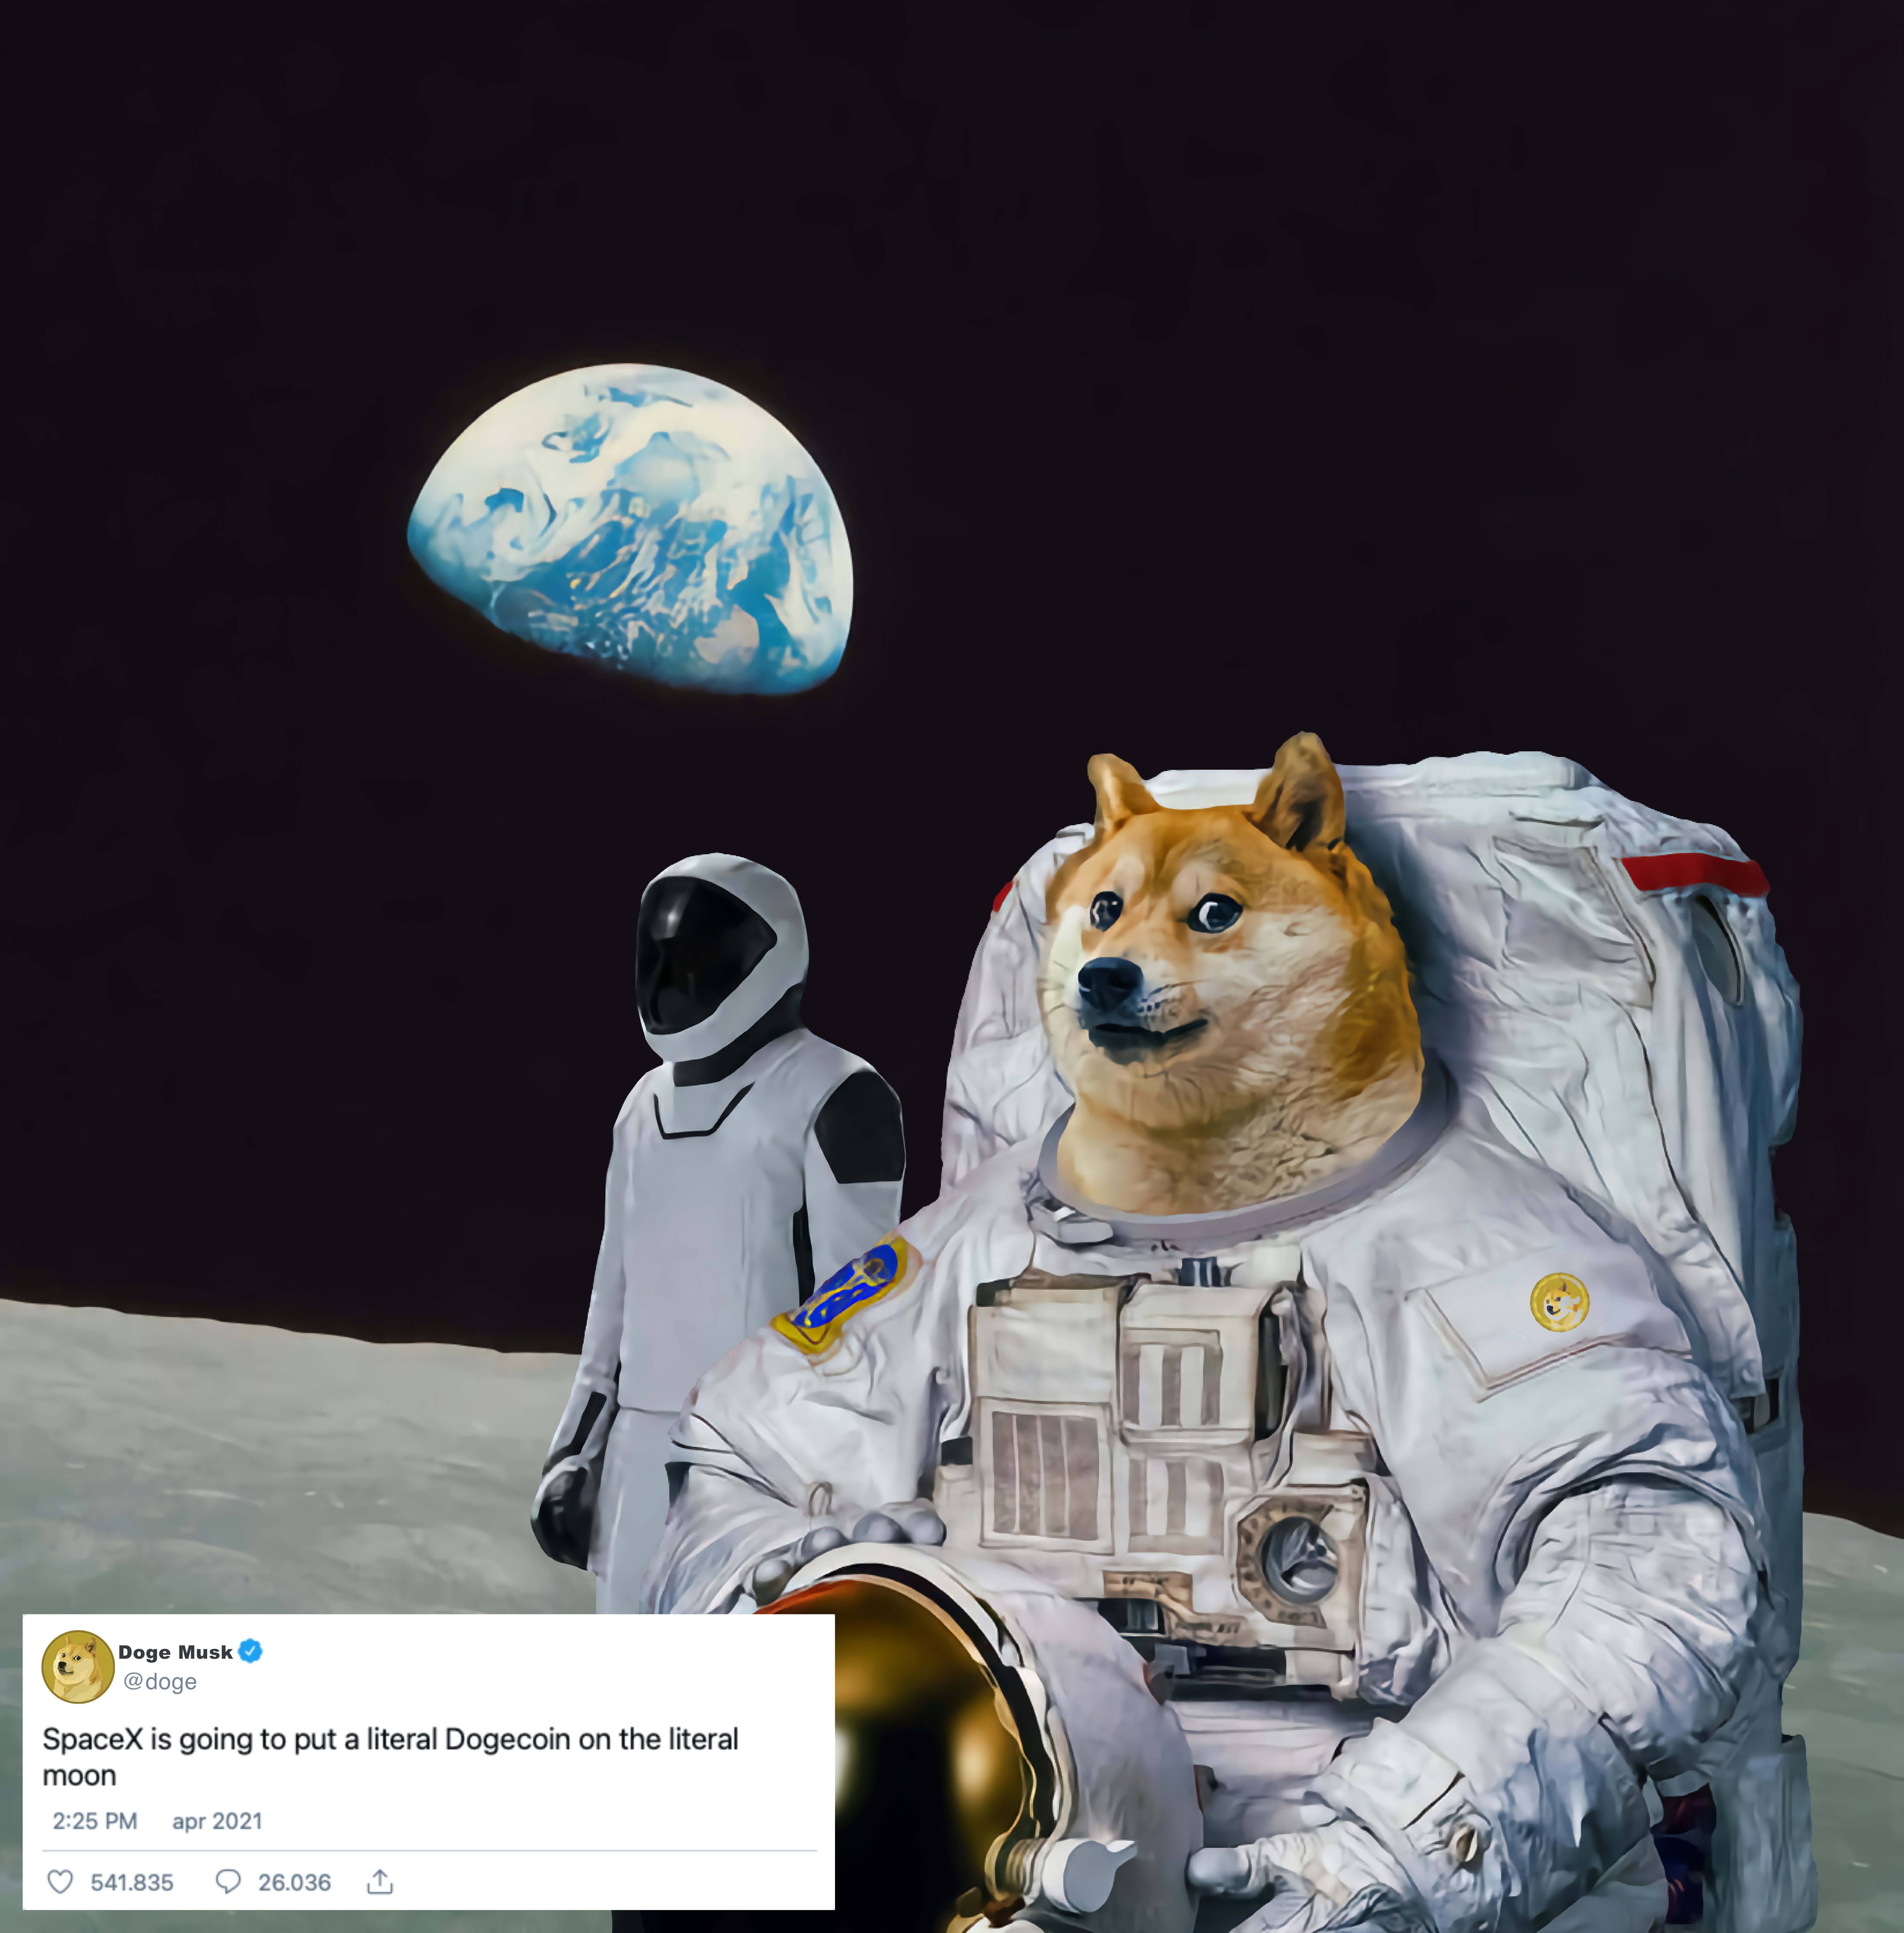 The Real Reason Elon Musk Wants To Put Dogecoin On The Moon